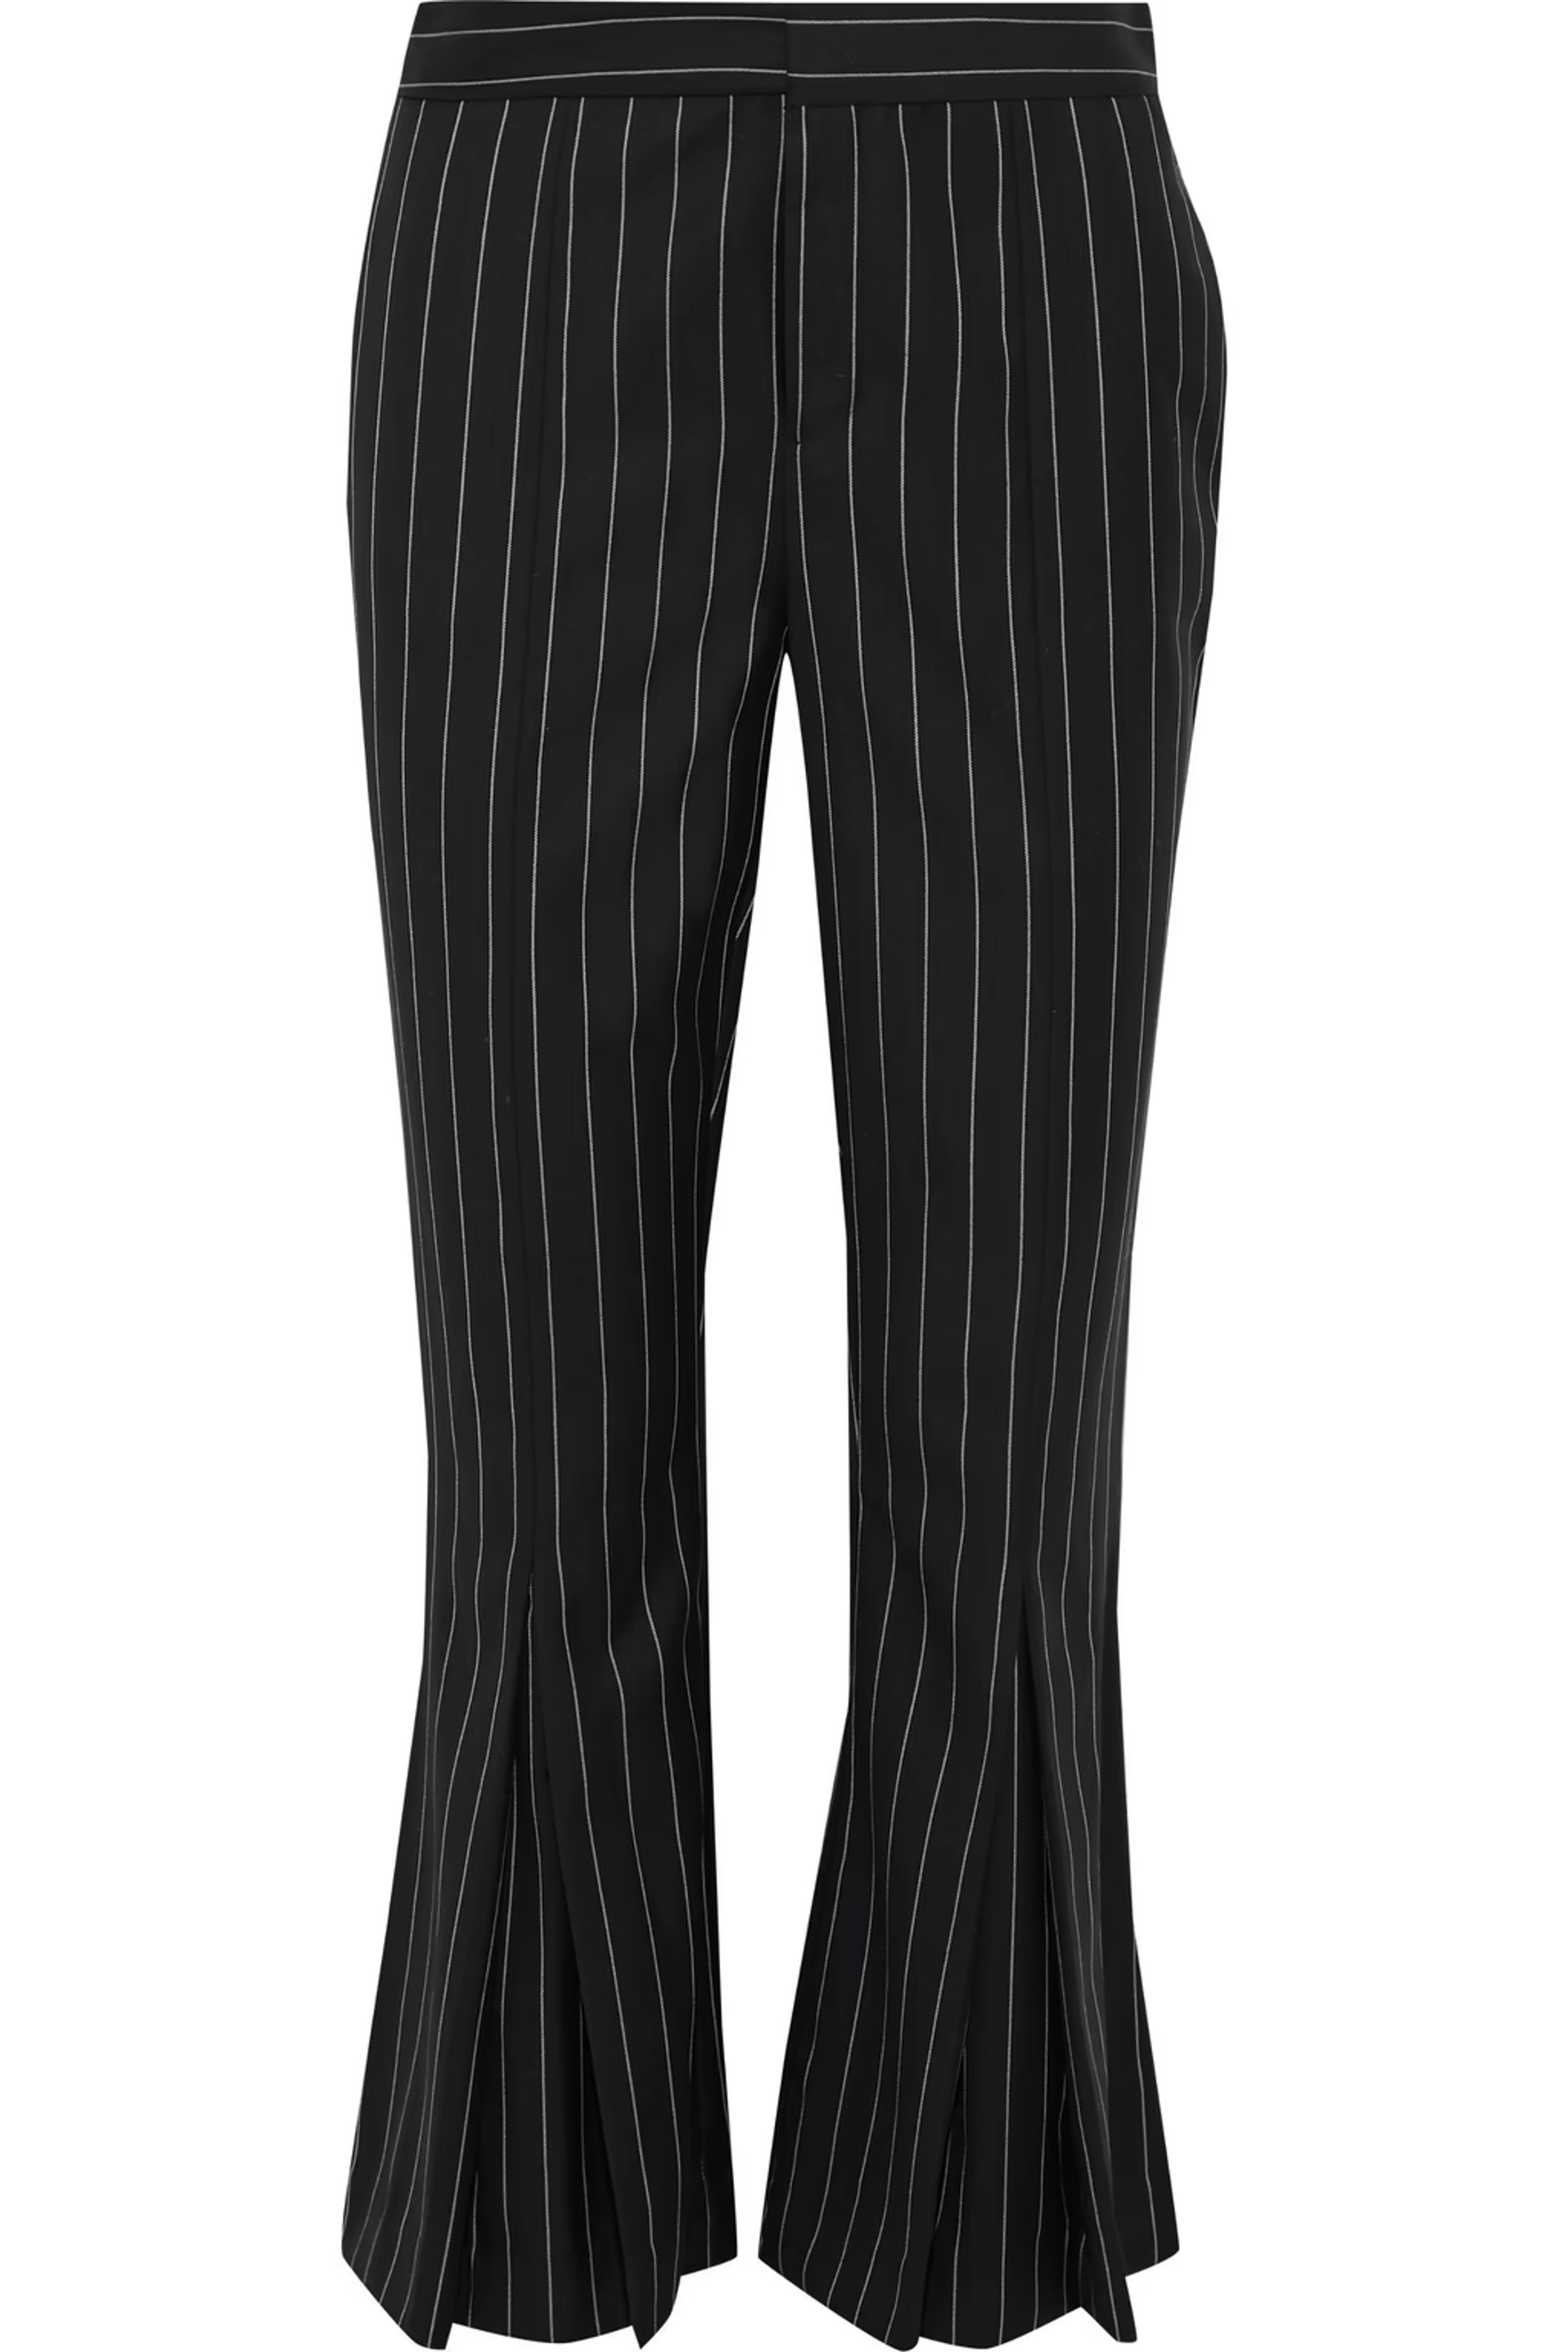 FRAME Pleated pinstriped wool-blend kick-flare pants